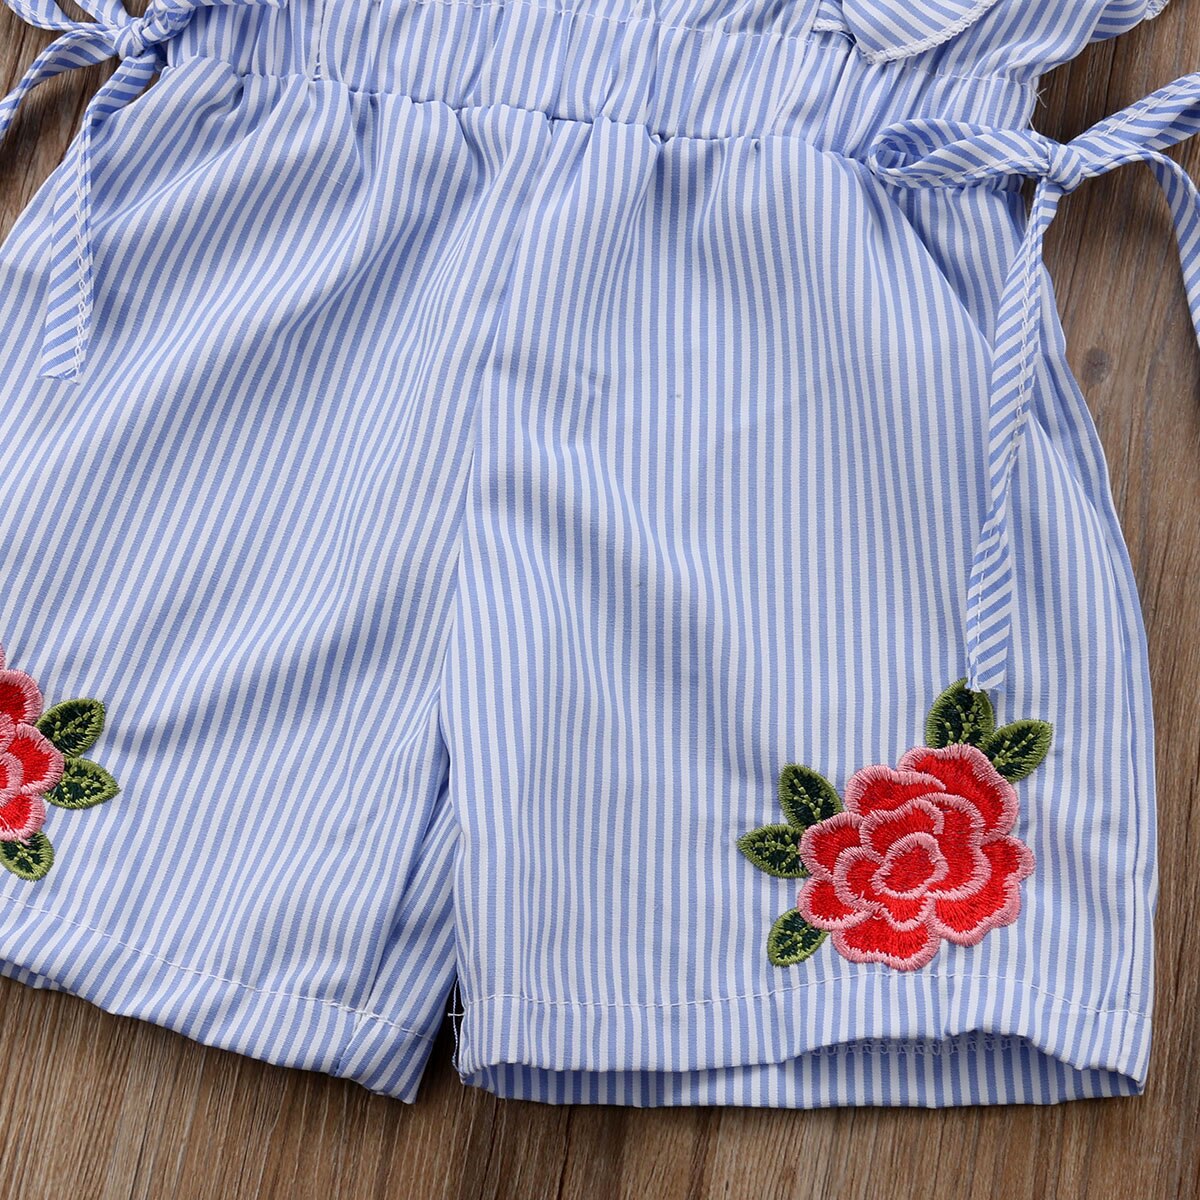 Toddler-Kids-Baby-Girl-Flower-Stripe-Ruffle-Romper-Jumpsuit-Outfits-Clothes-4